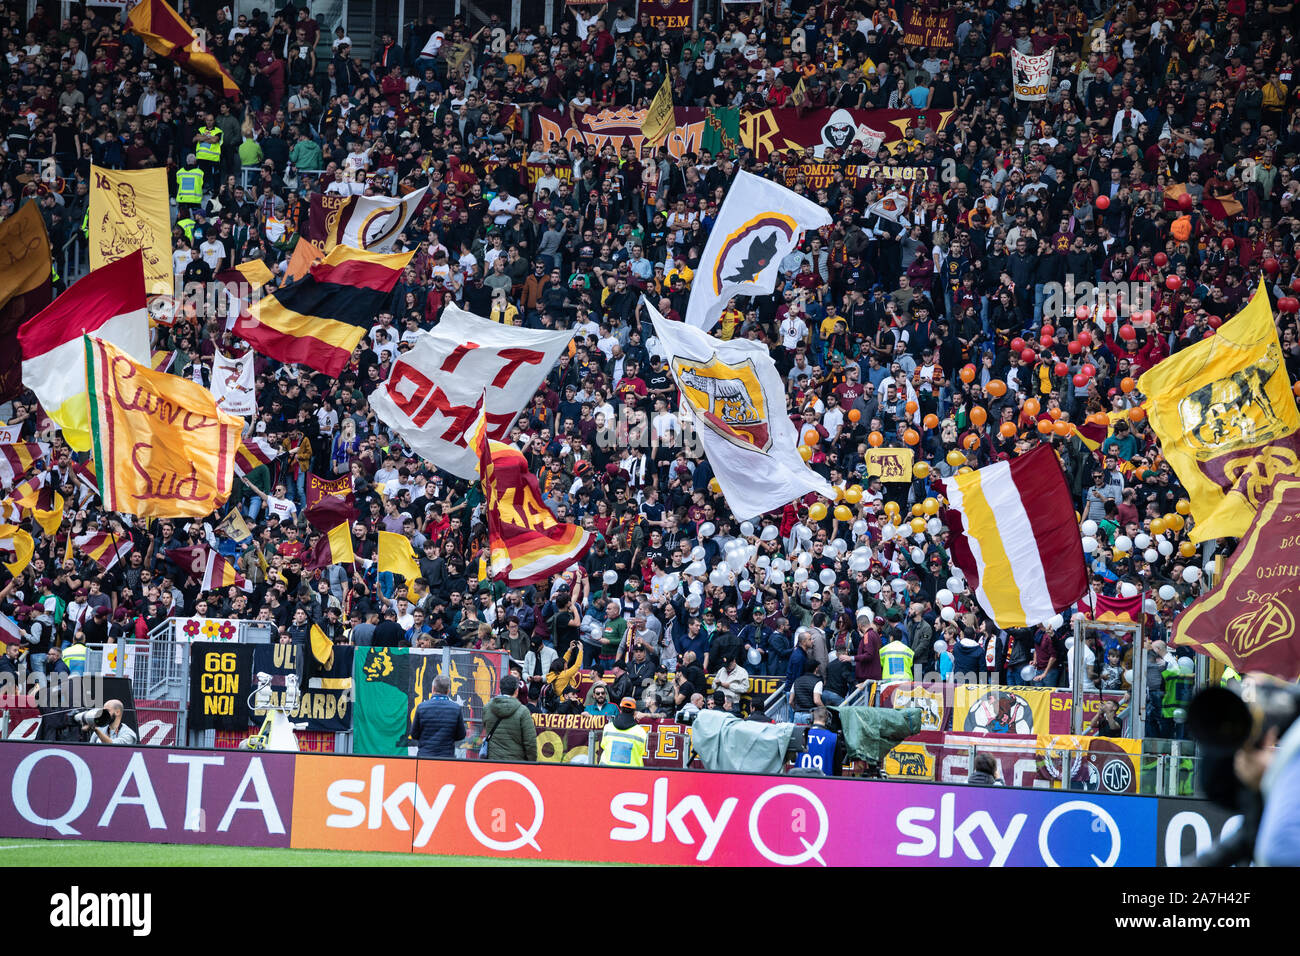 AS Roma supporters seen during the Italian Serie A football match between AS Roma and SSC Napoli at the Olympic Stadium in Rome.(Final score; AS Roma 2:1 SSC Napoli) Stock Photo